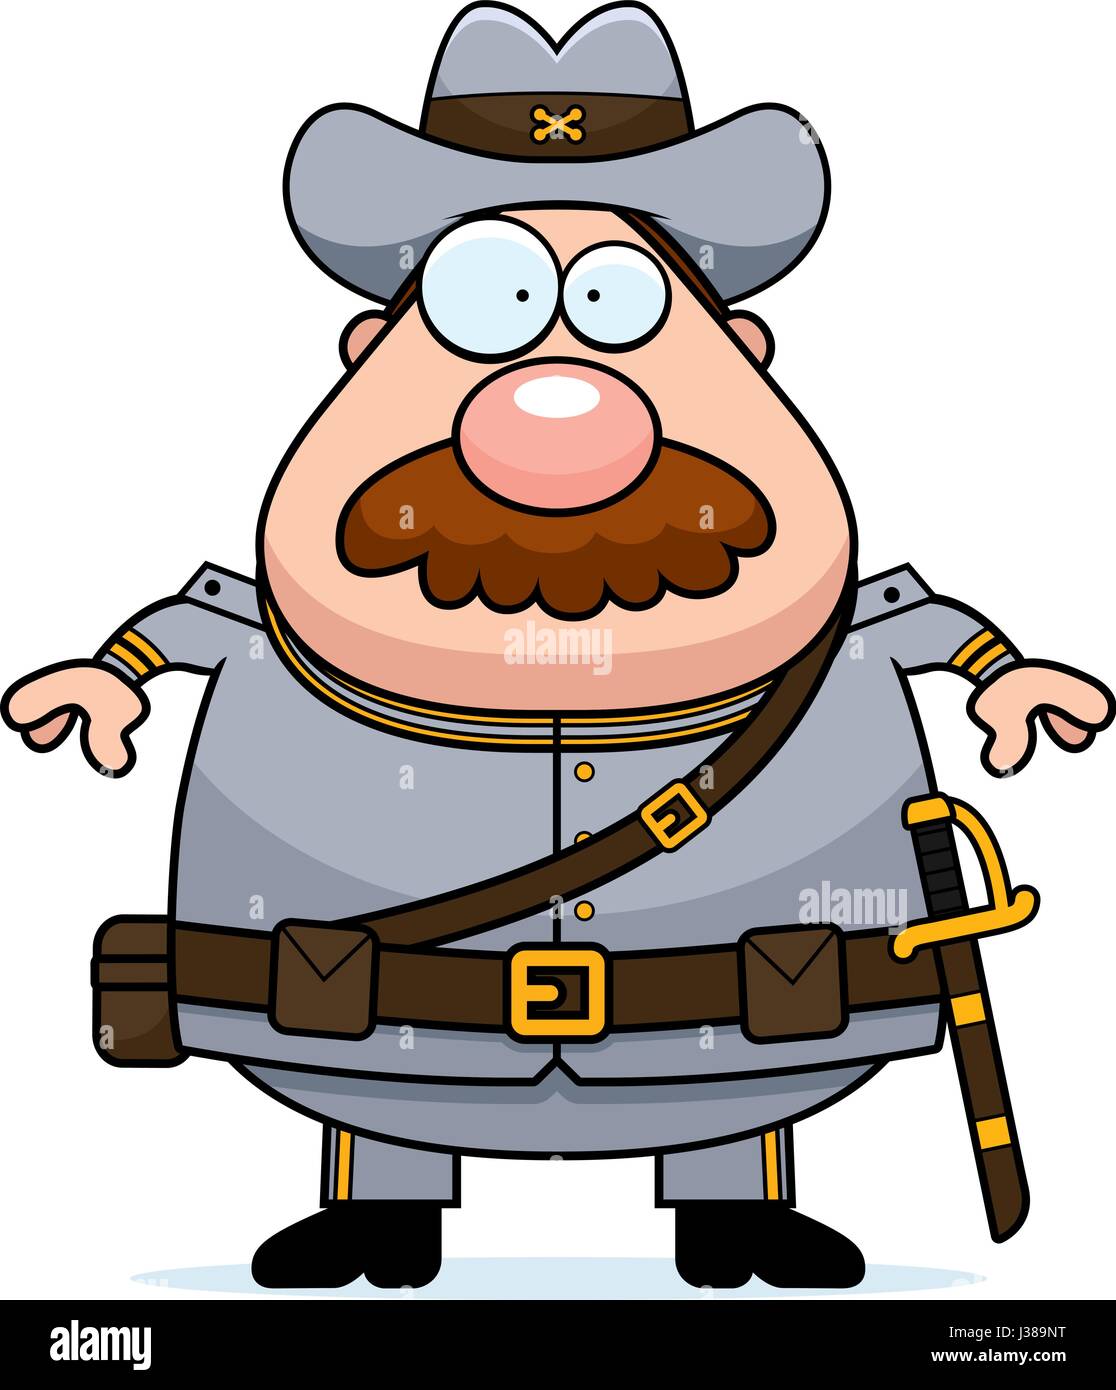 A cartoon illustration of a Civil War Confederate soldier with a mustache. Stock Vector